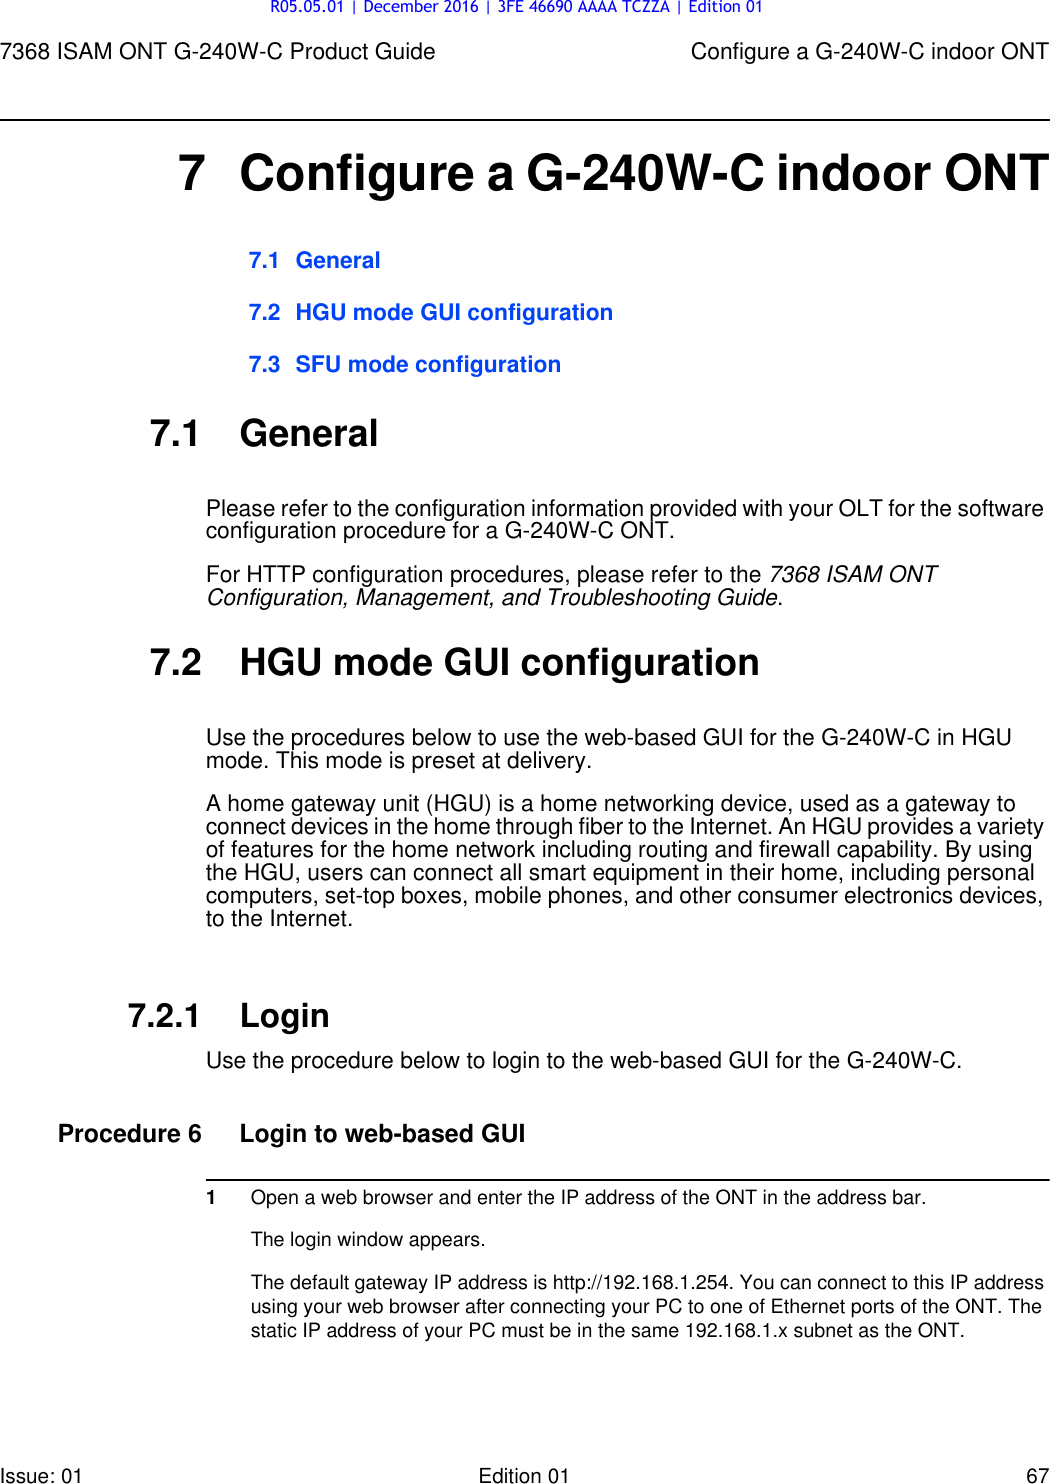 Page 67 of Nokia Bell G240W-C GPON ONU User Manual 7368 ISAM ONT G 240W B Product Guide